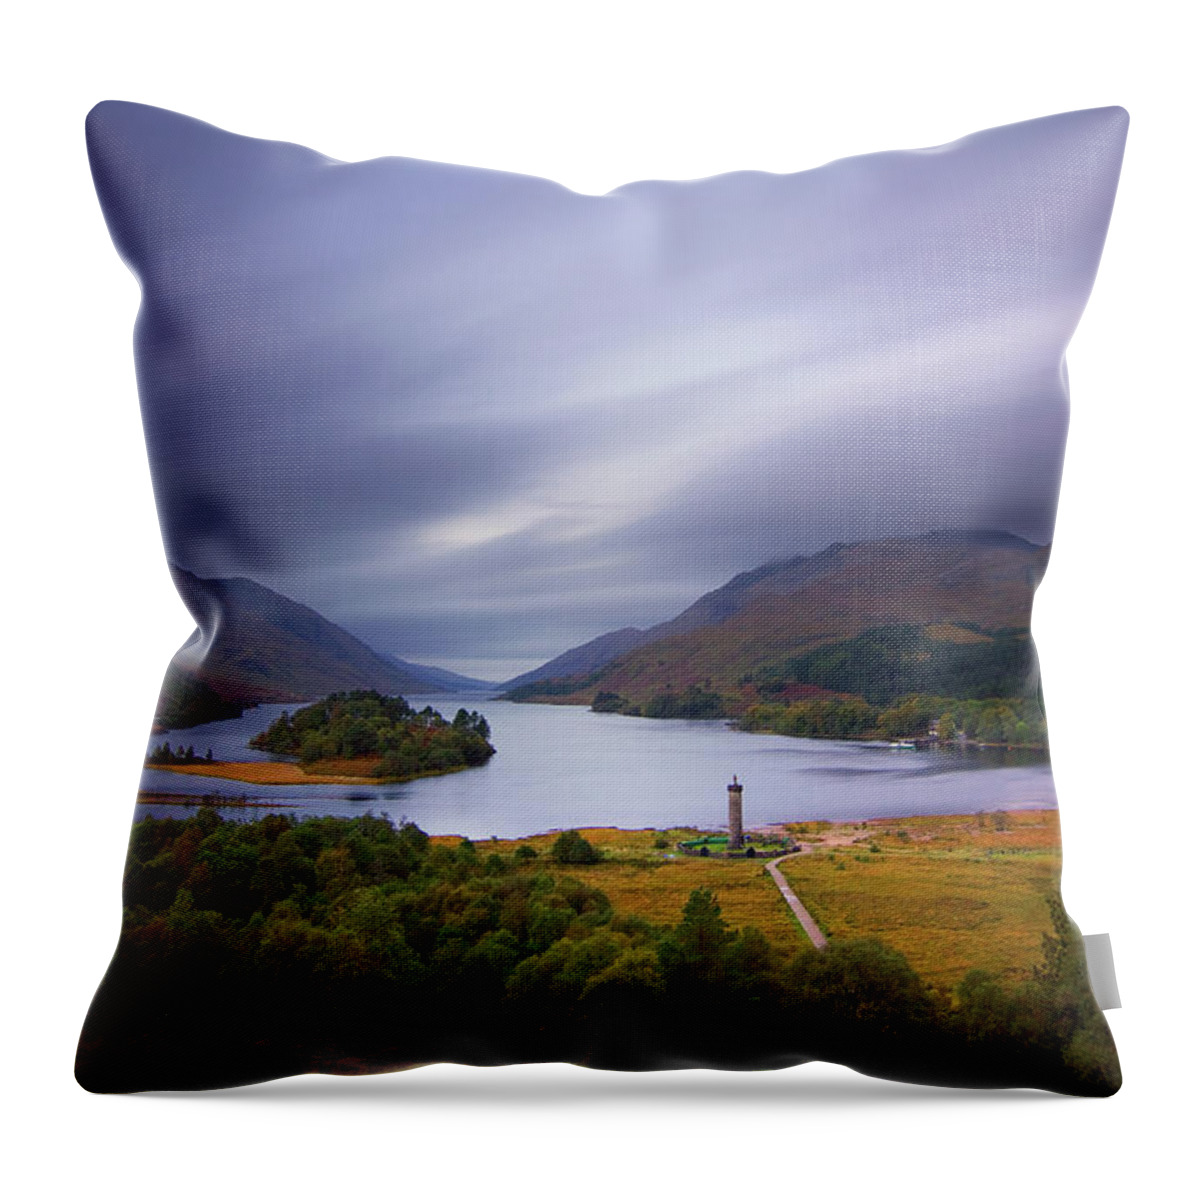 Scenics Throw Pillow featuring the photograph Loch Shiel In Glenfinnan, Scotland by Kit Downey Photography